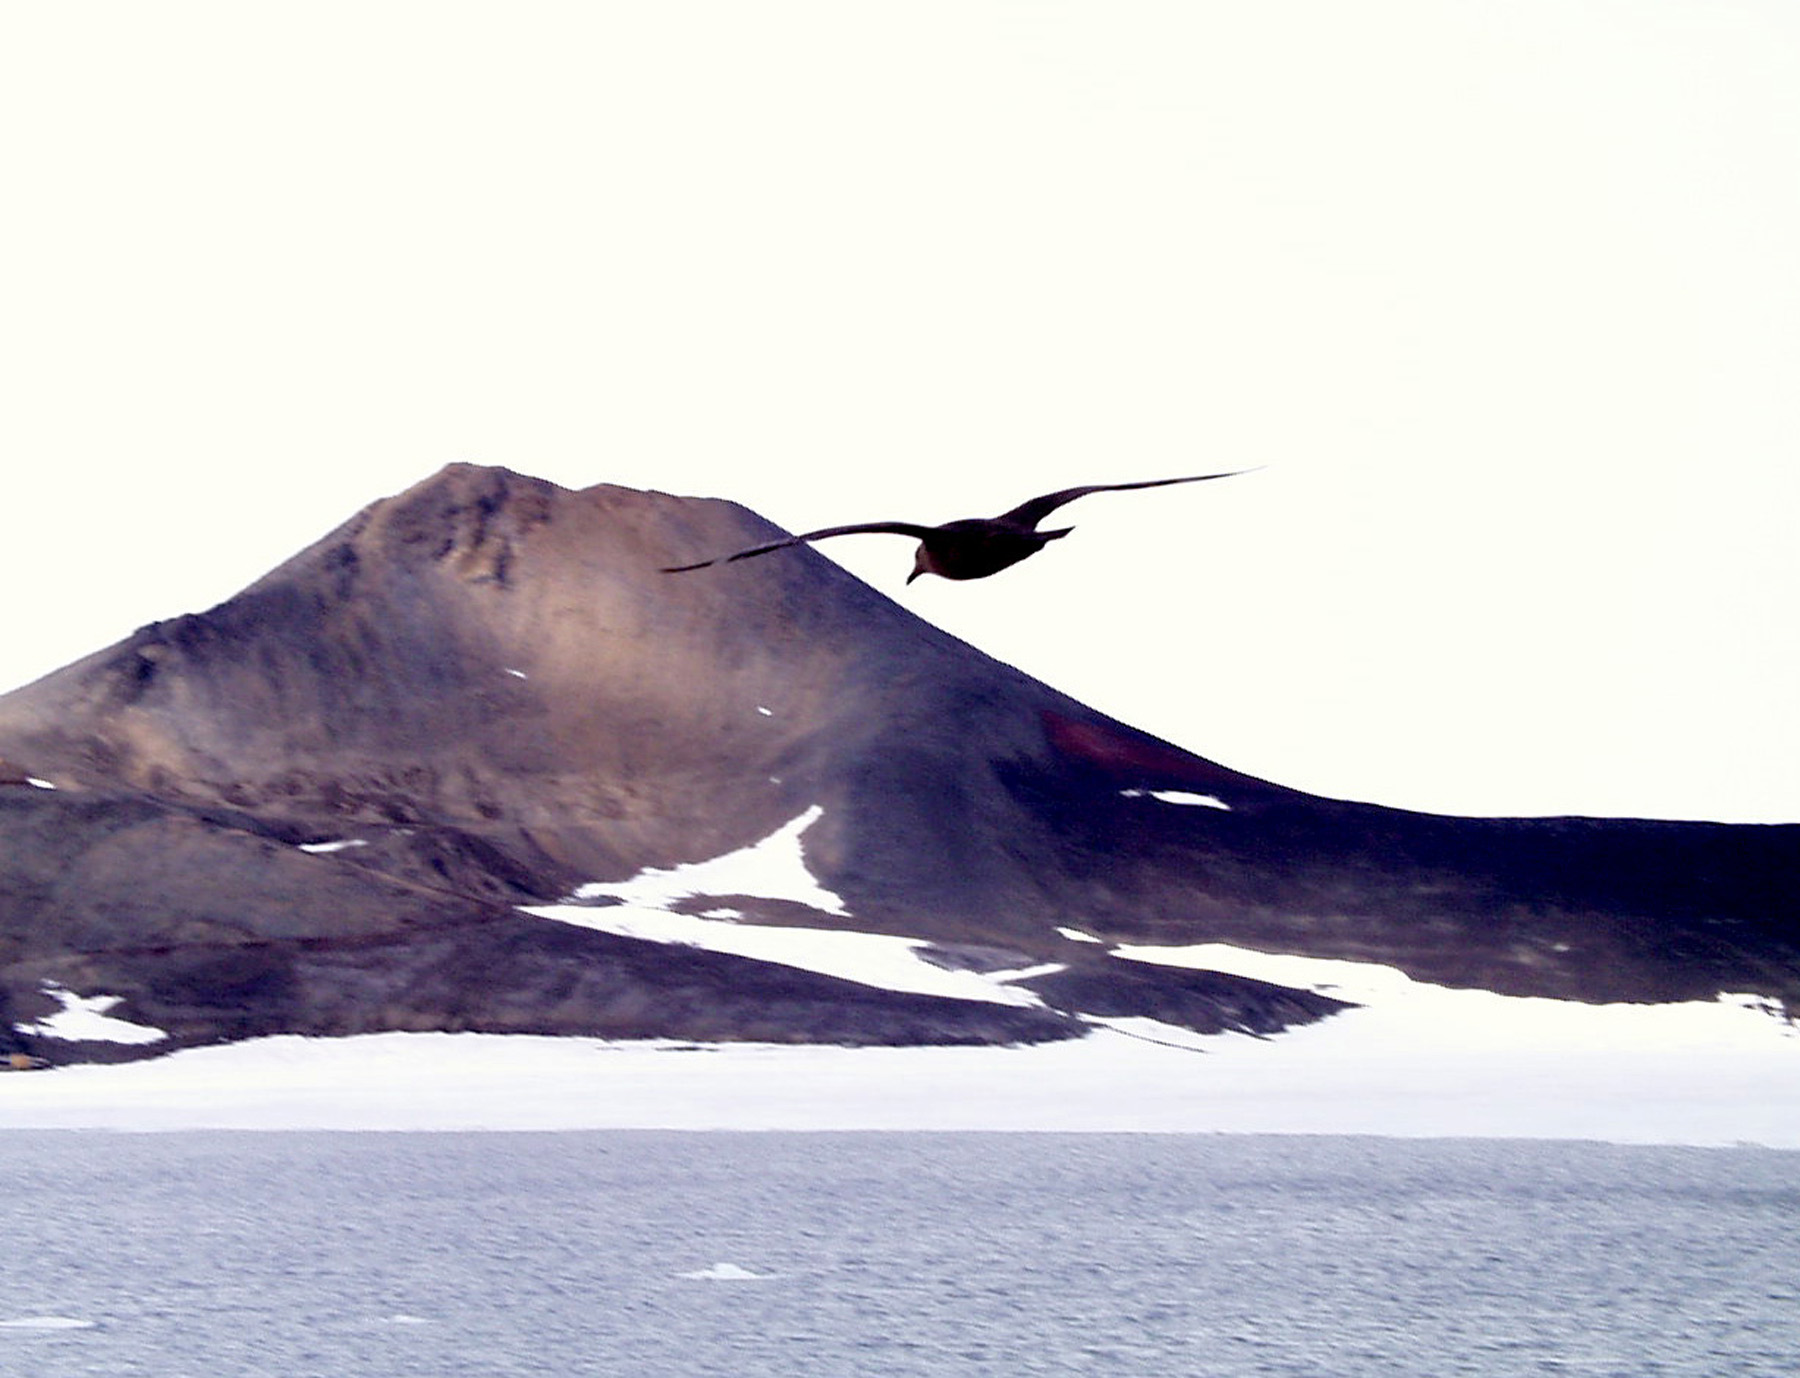 A bird is in the air.  A large hill is in the background.